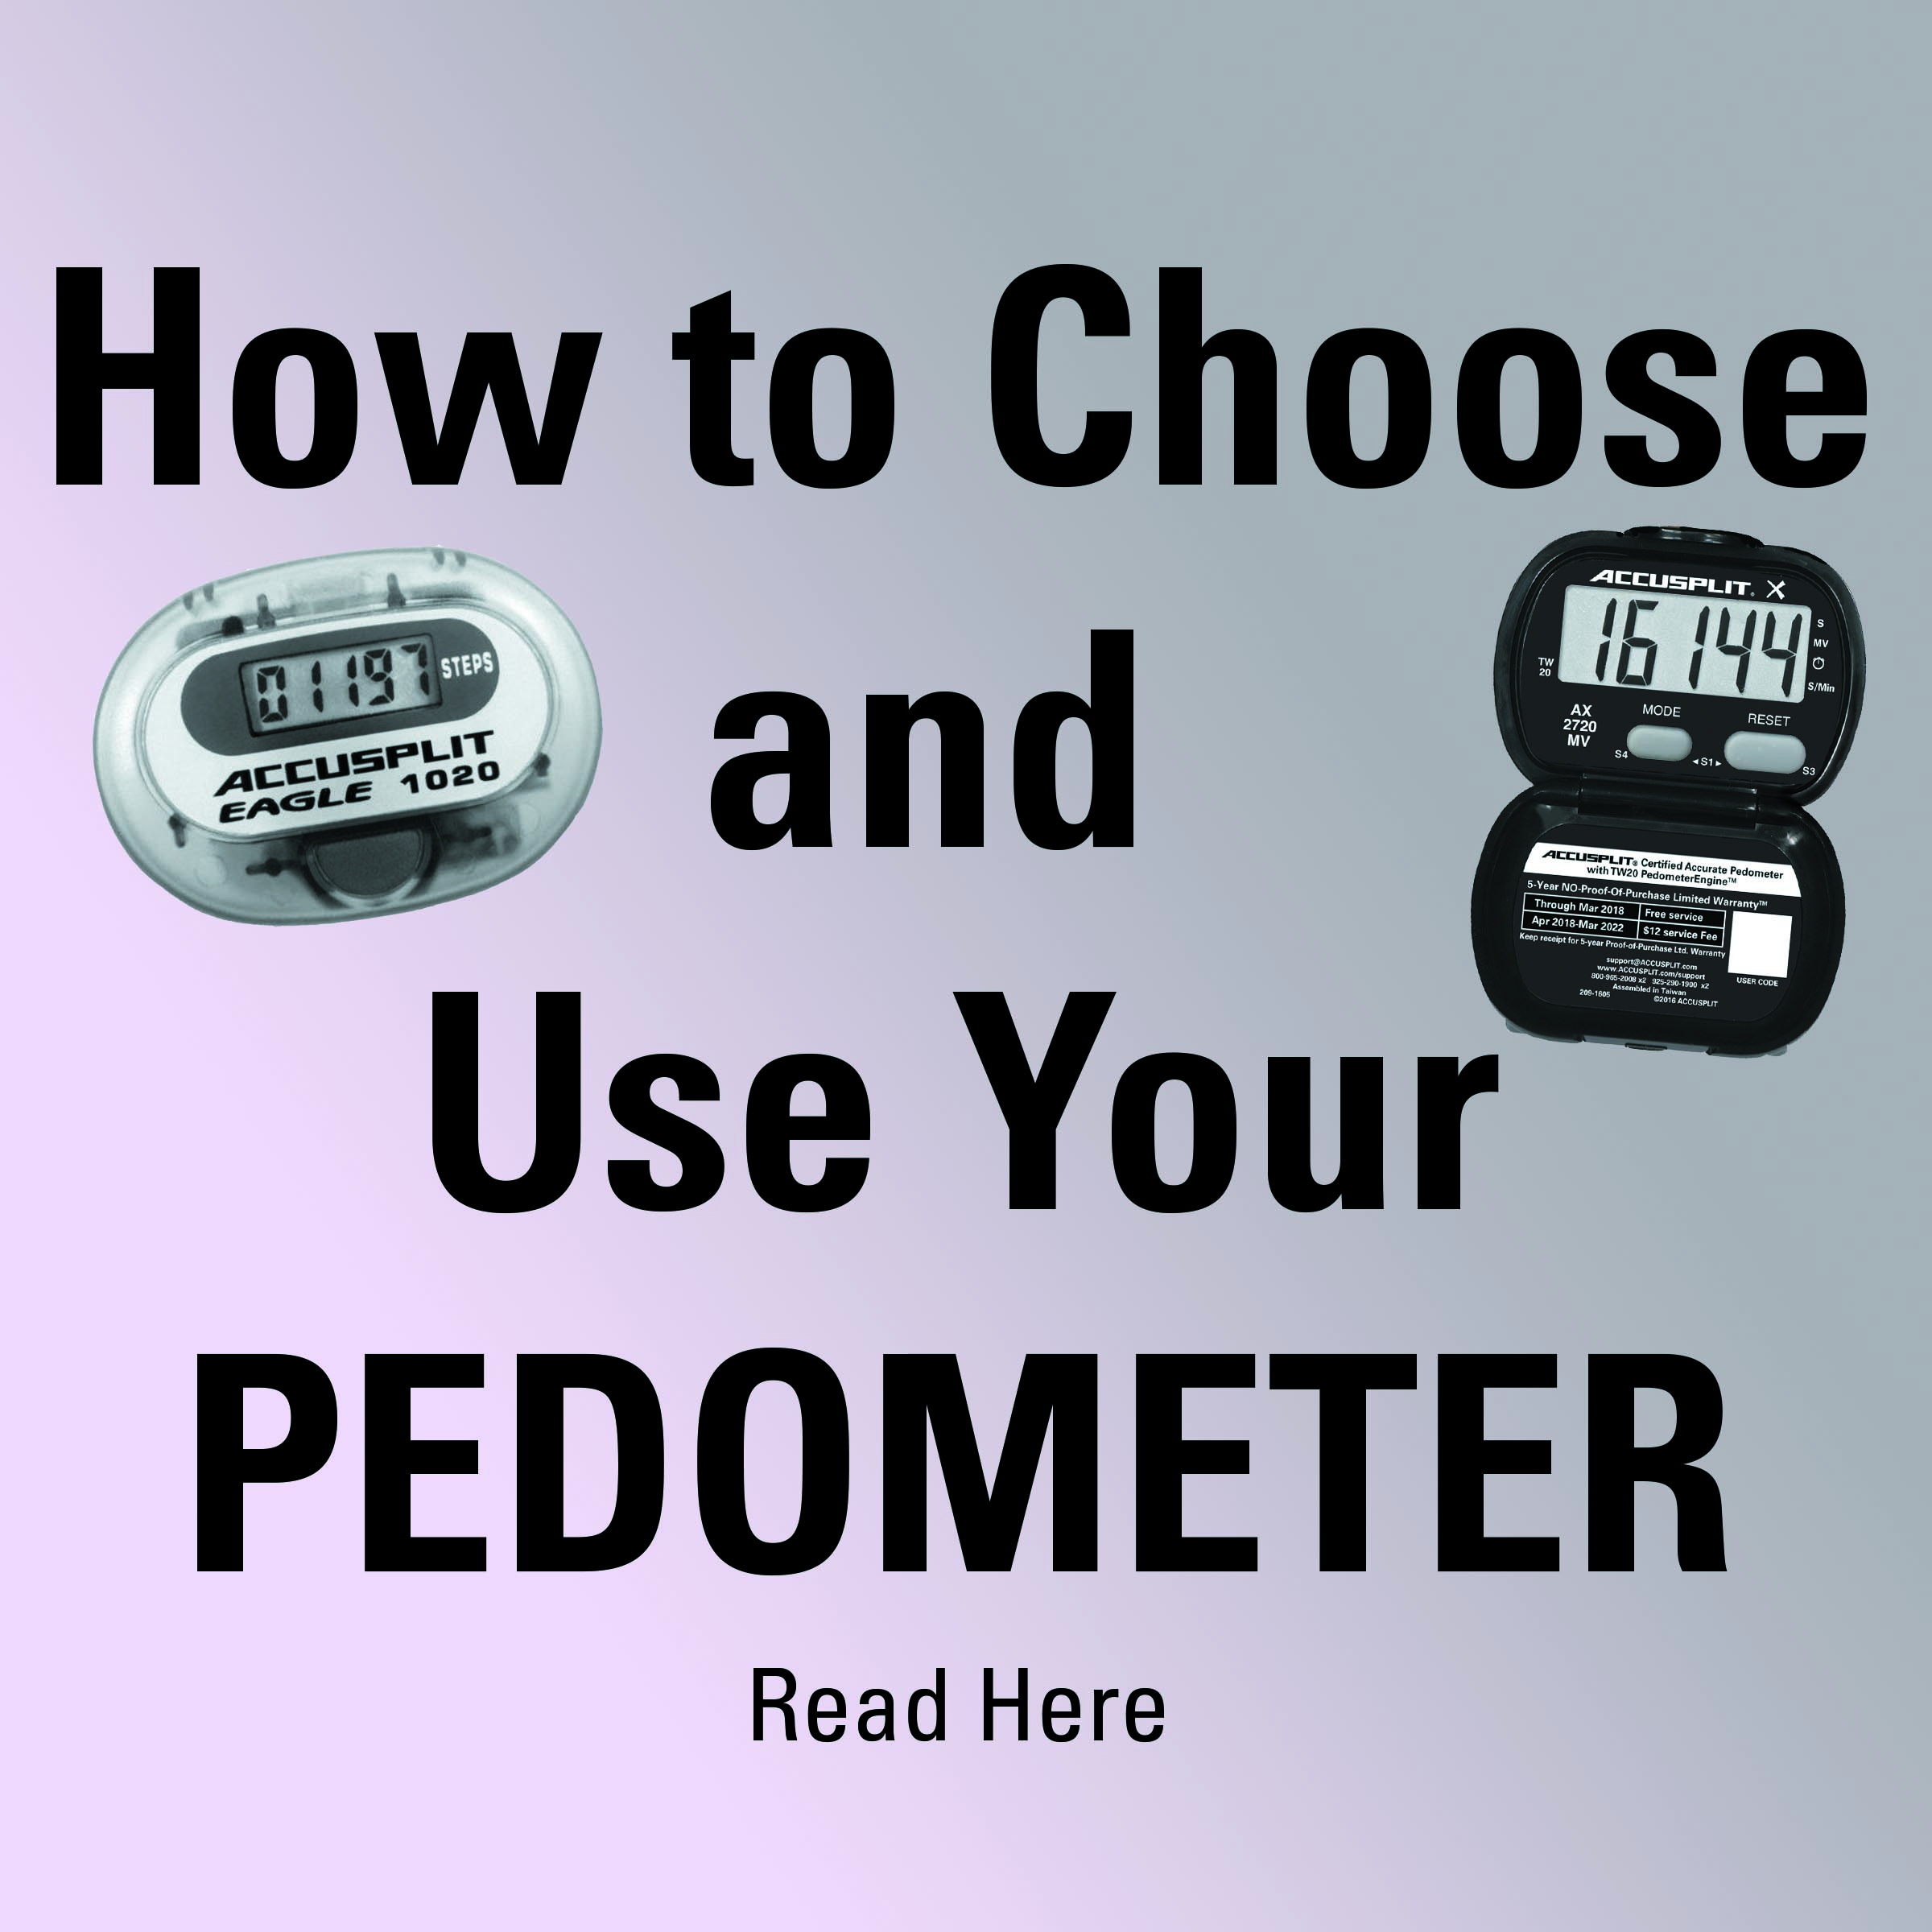 Choose and use you pedometer icon on Pedometer.com